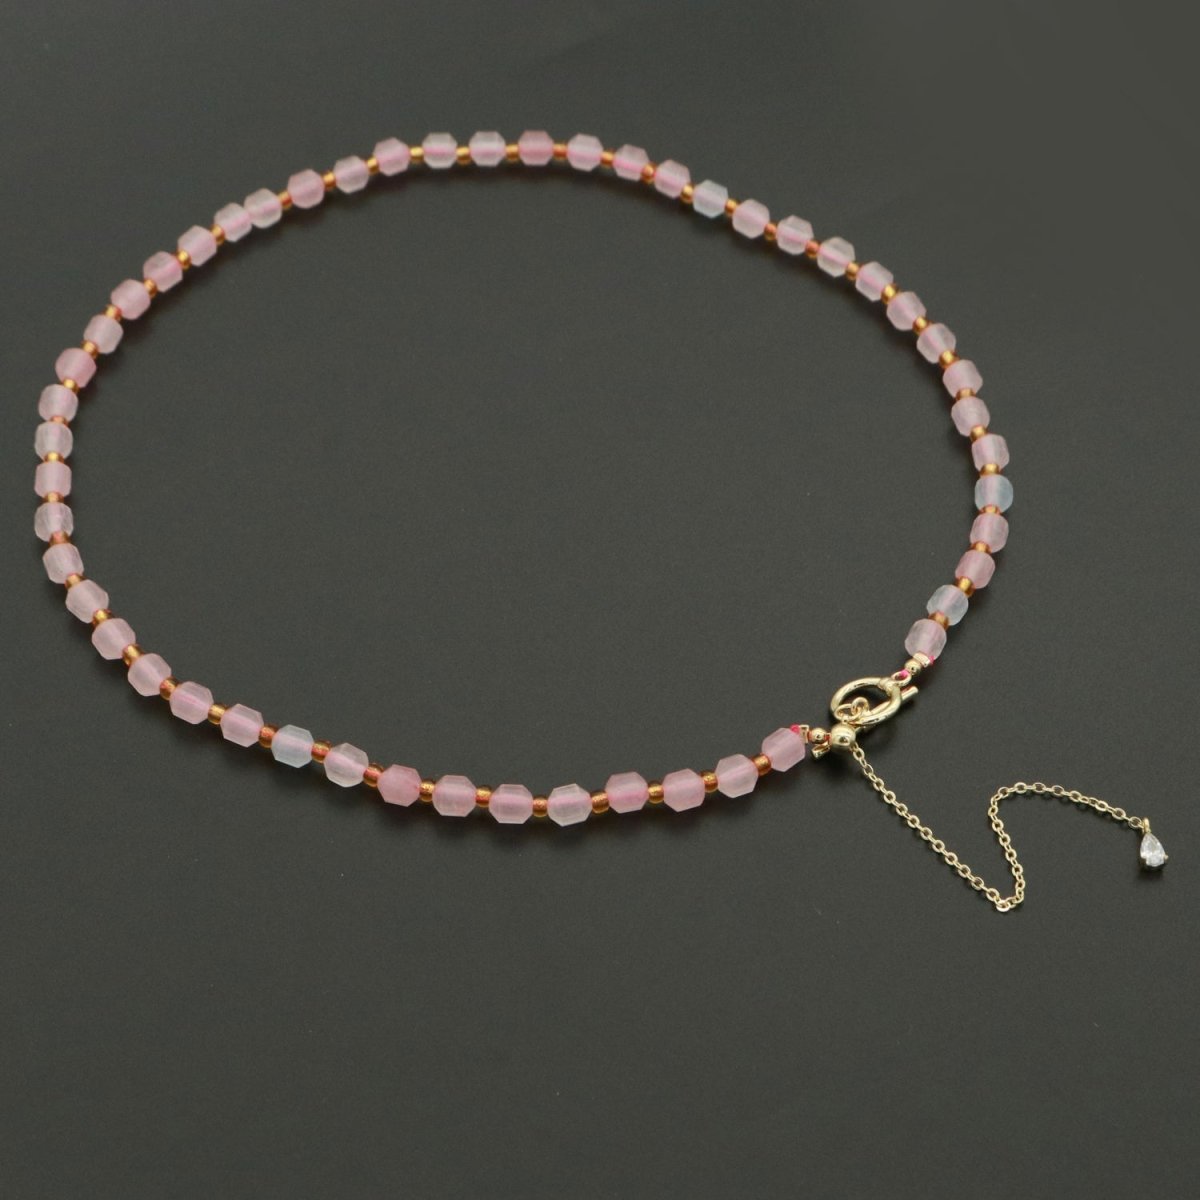 Pink Morganite Necklace 5.6mm Beads Mini Morganite stone Bead Necklace 16.5" necklace with Toggle Clasp | WA-255 Clearance Pricing - DLUXCA